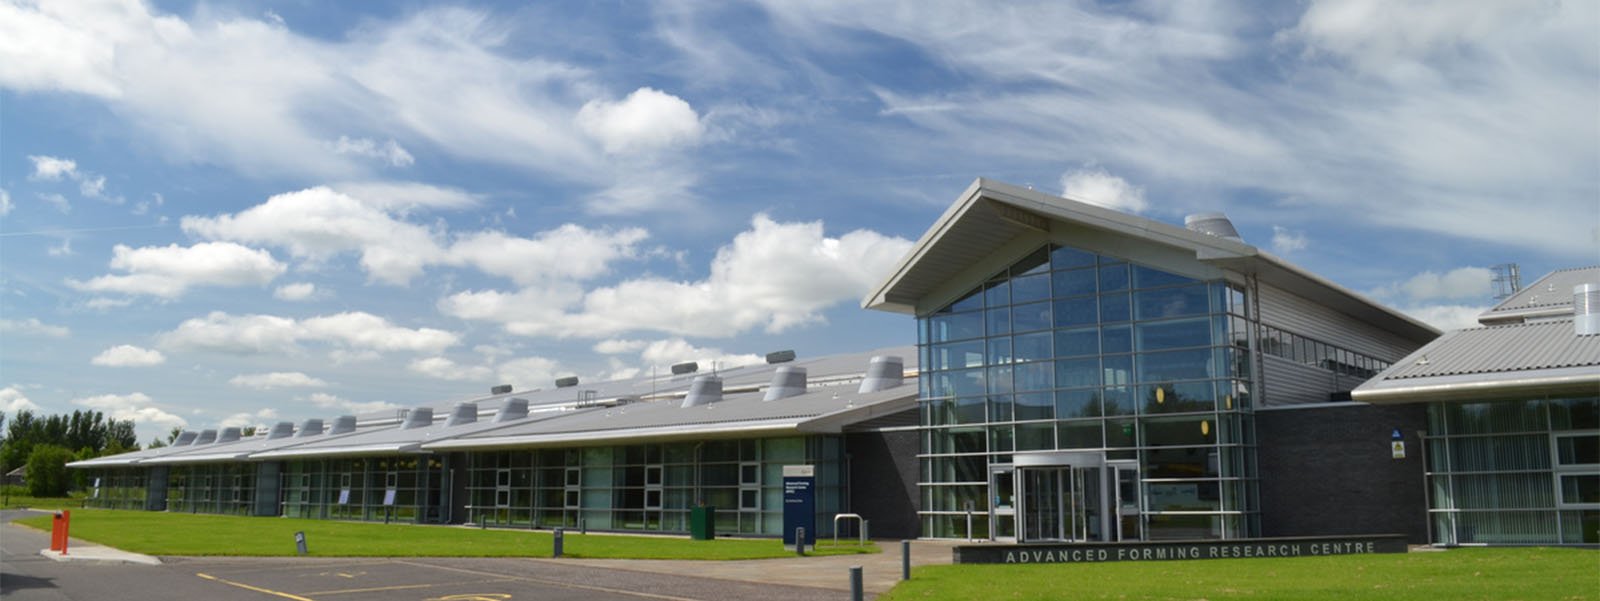 Exterior of Advanced Forming Research Centre